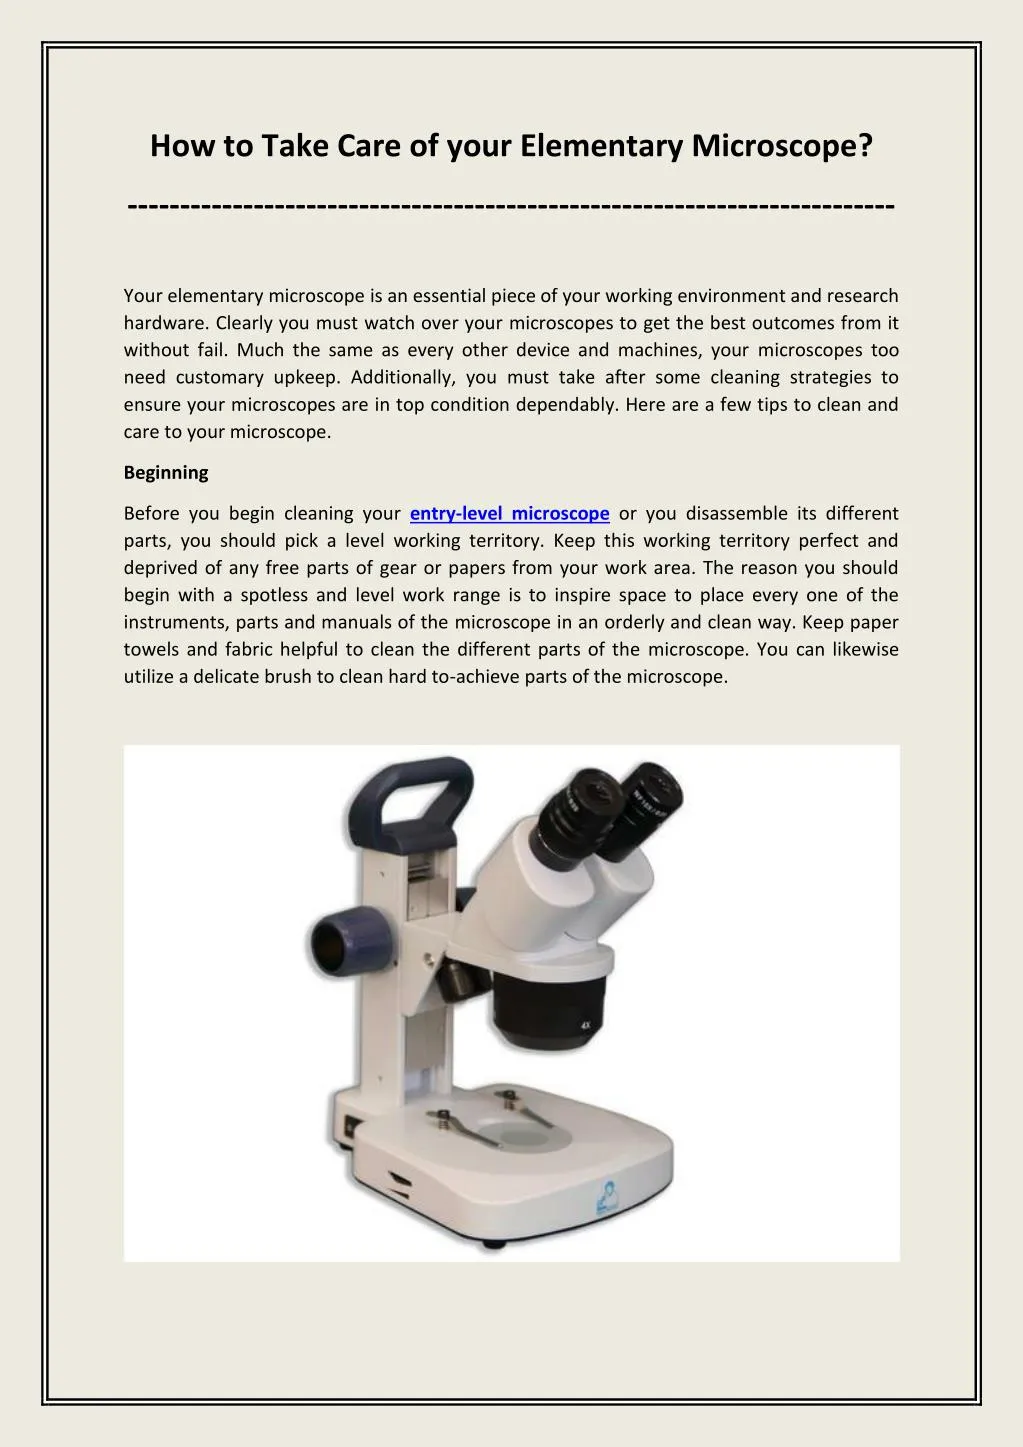 how to take care of your elementary microscope